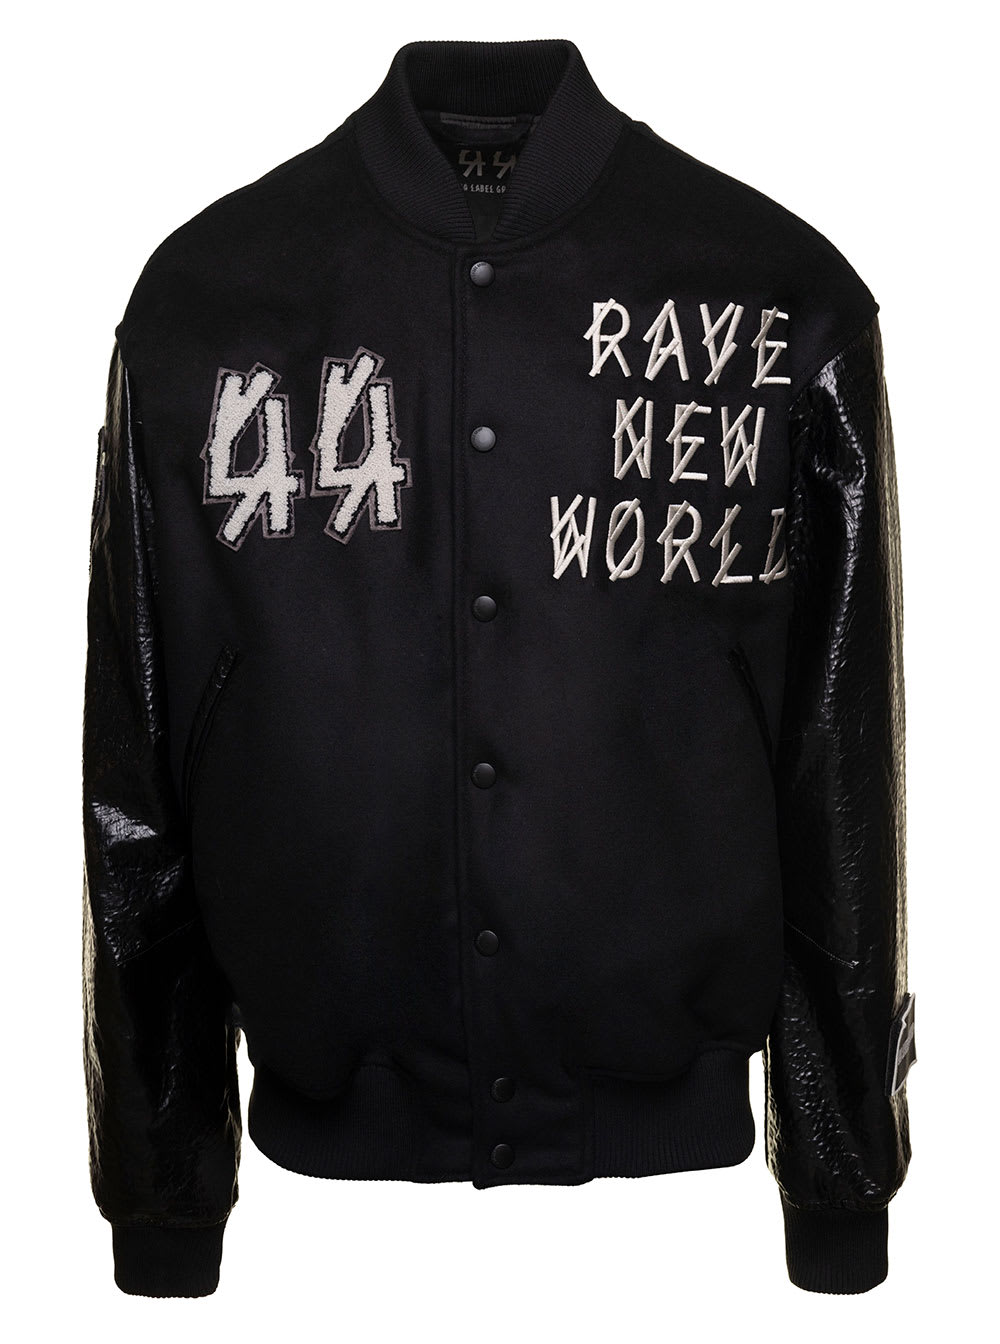 Shop 44 Label Group Black Varsity Jacket With Faux Leather Sleeves And Logo Patch Man